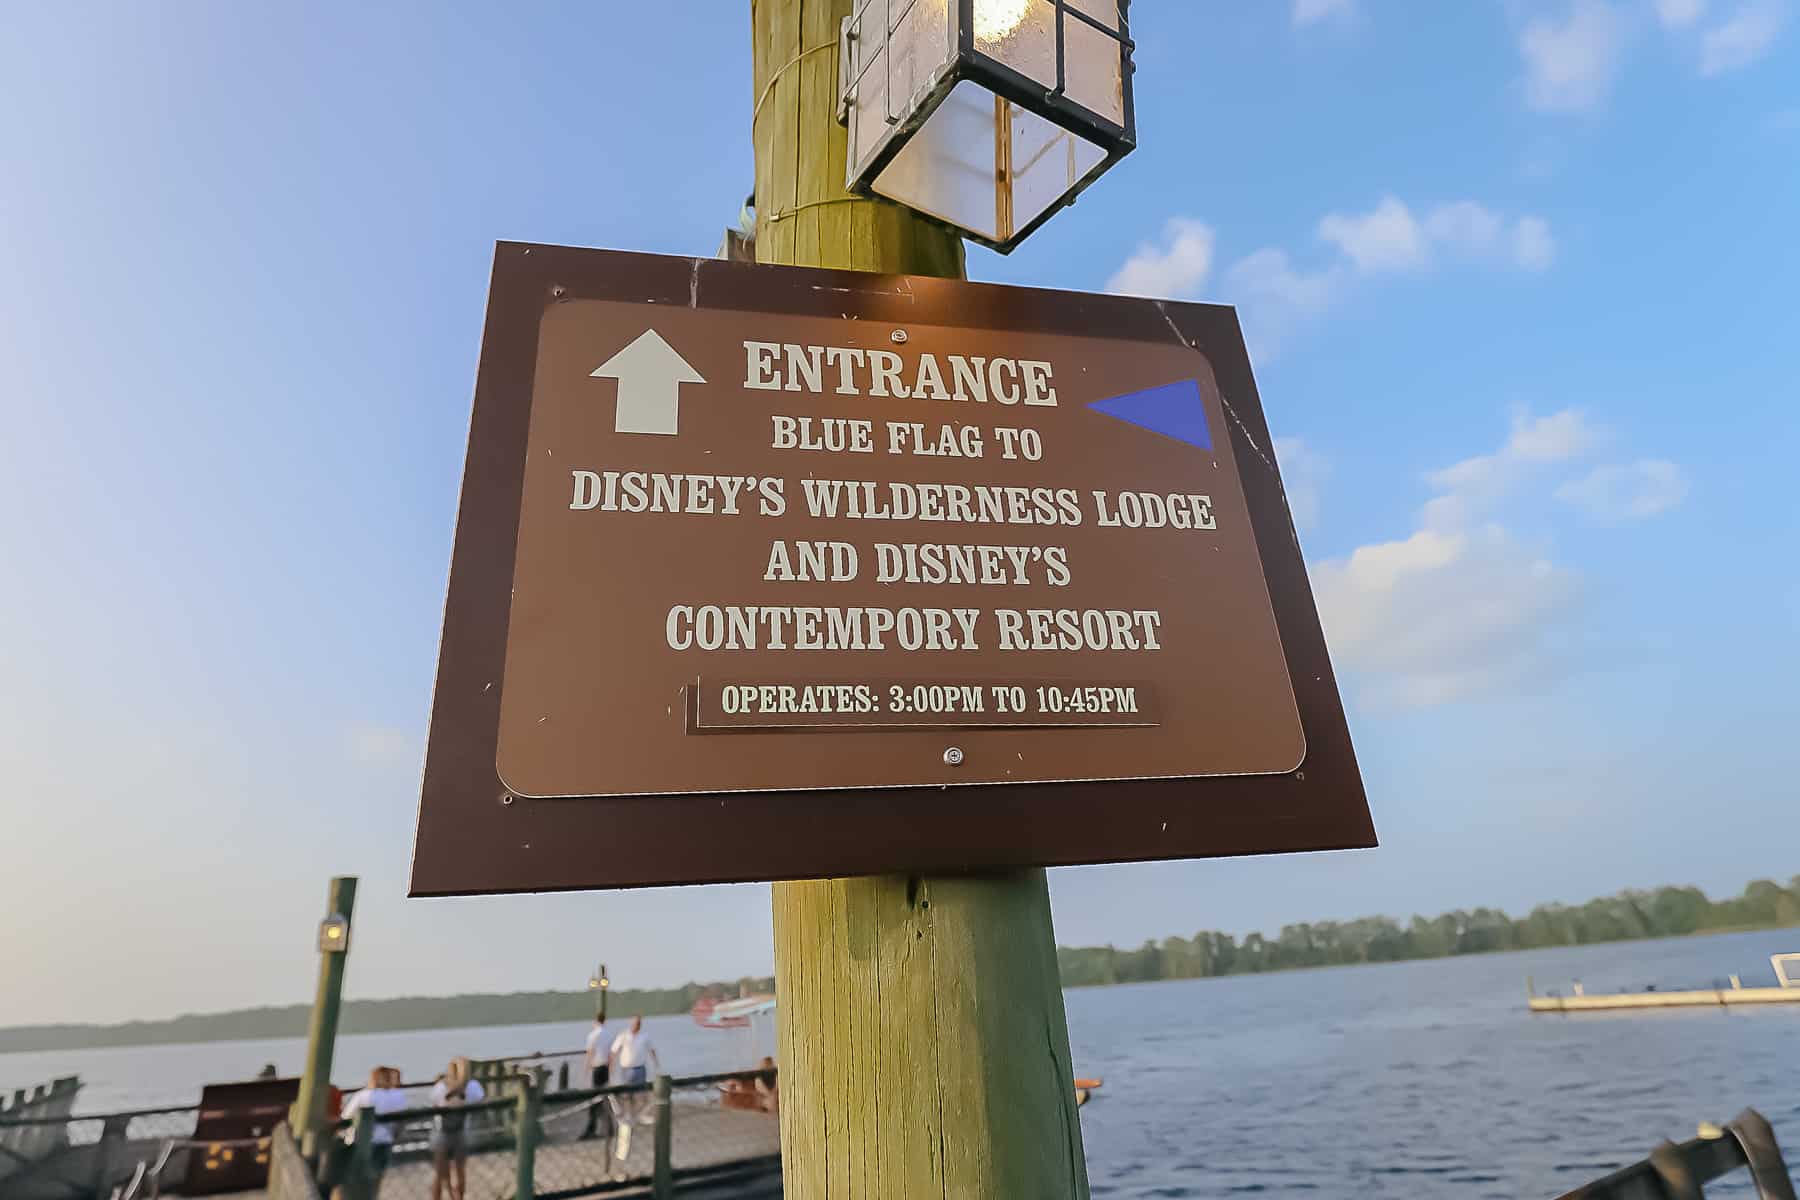 Sign at Fort Wilderness that indicates the hours of operation for the boat service.